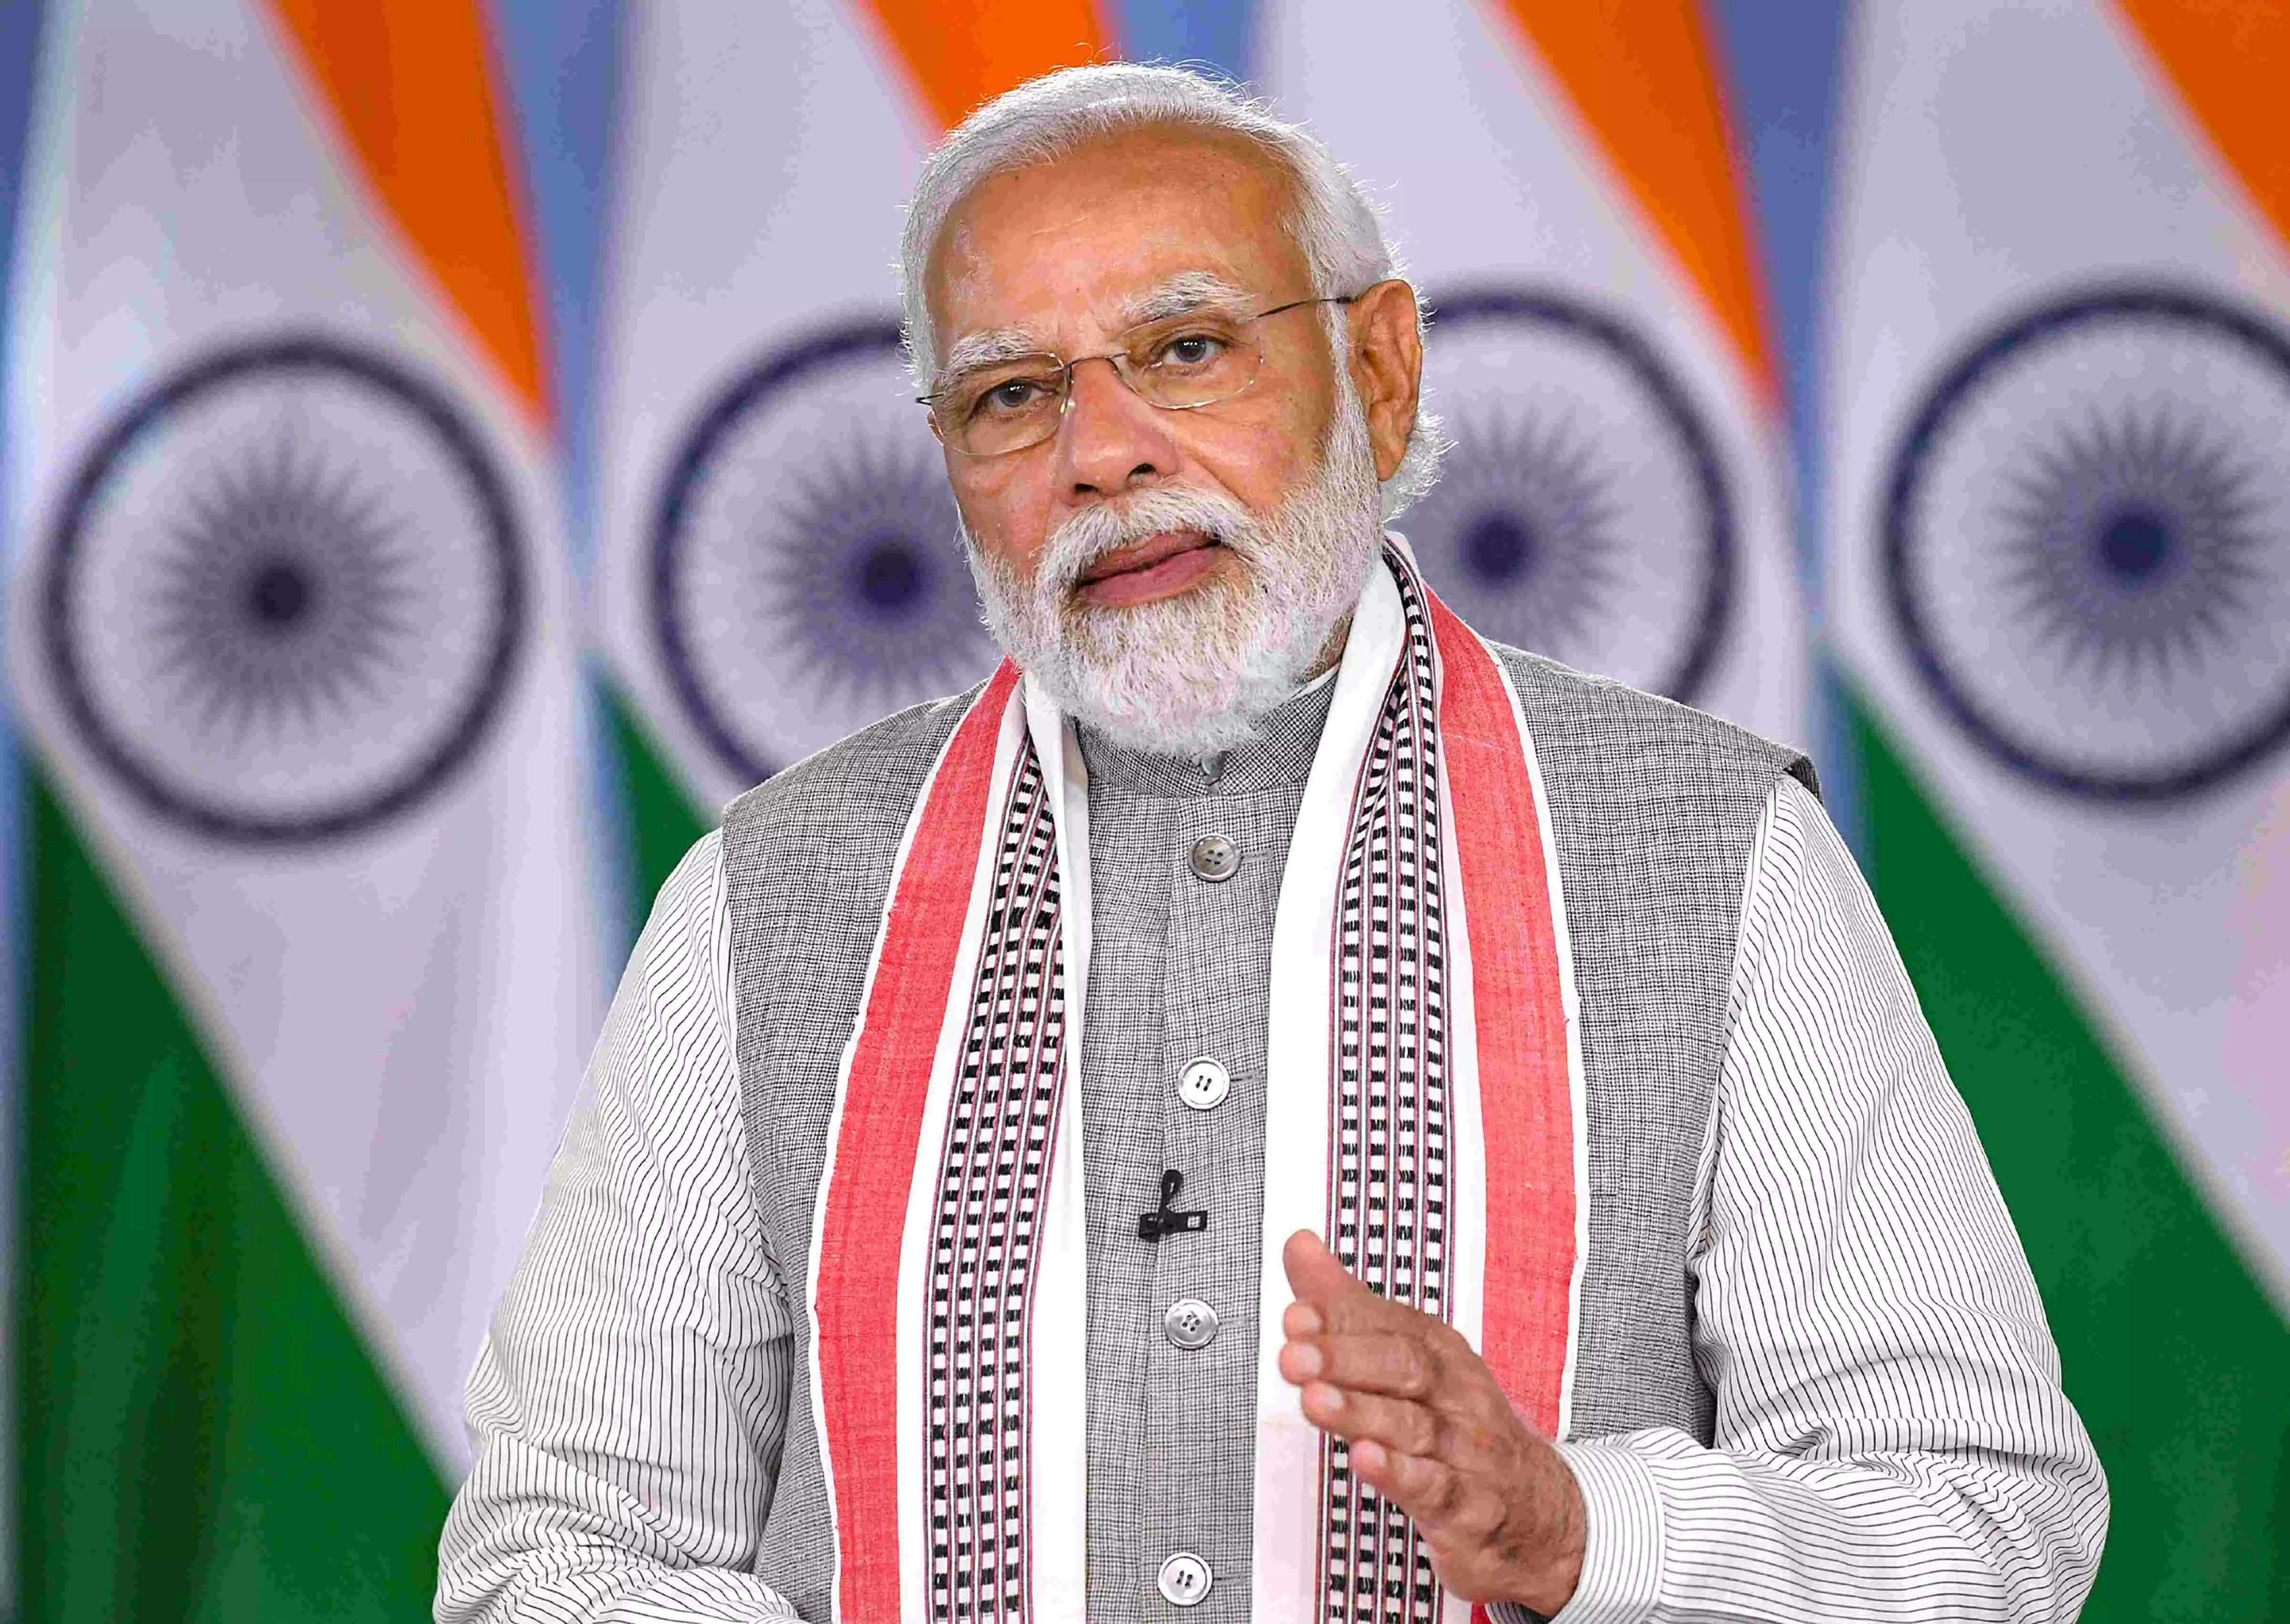 PM Modi to arrive in Varanasi for 2-day visit on Sunday, will launch development projects